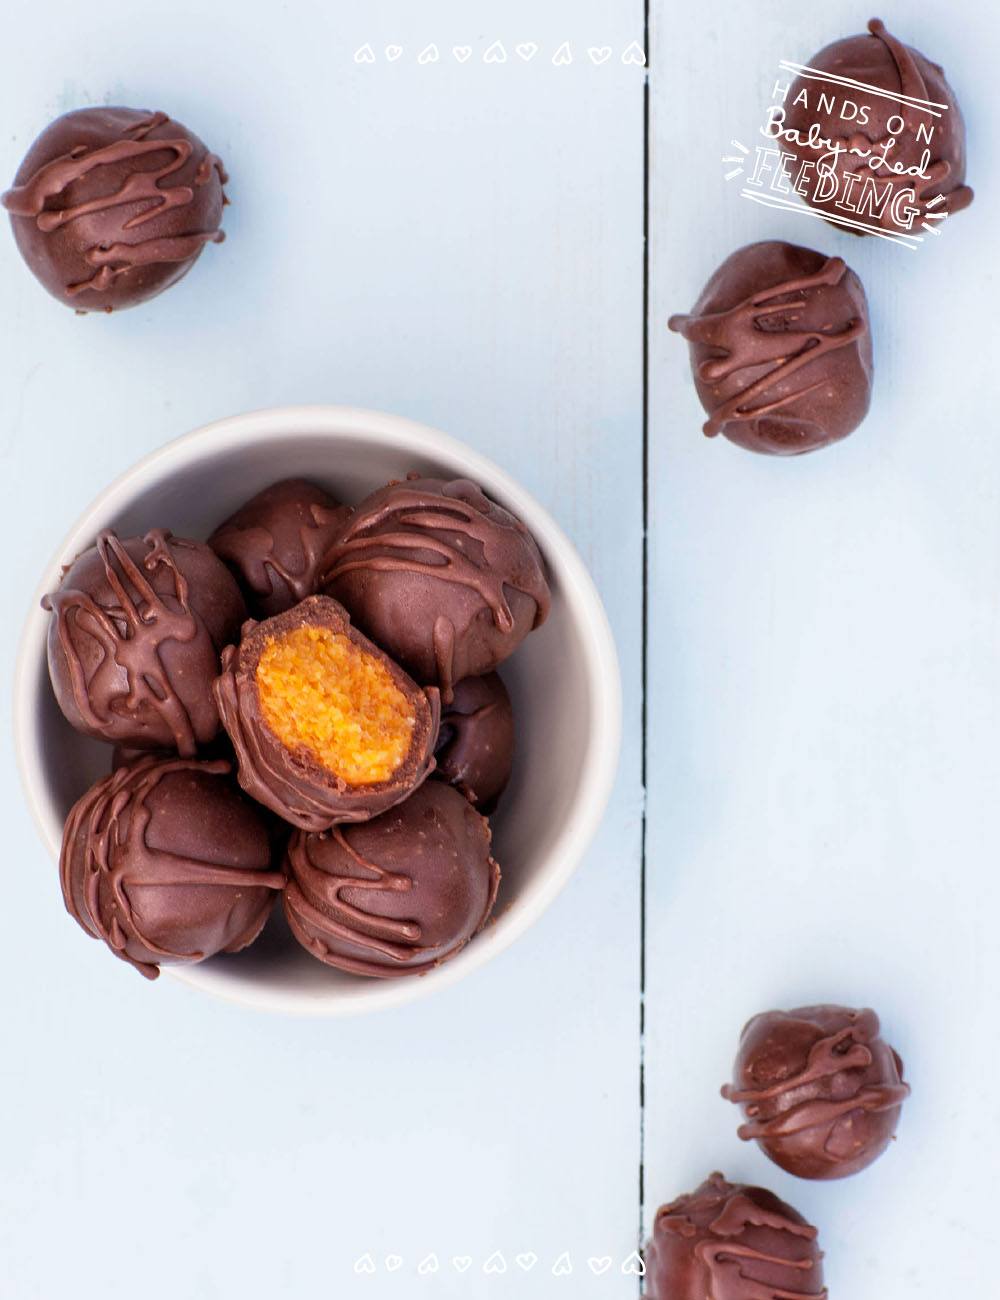 Sweet Potato & Orange Chocolate Truffles - Refined Sugar Free Baby Led Feeding. Healthy Homemade Baby Food Recipes. These delicious baby treat recipe are easy to make and are soft for little hands. 